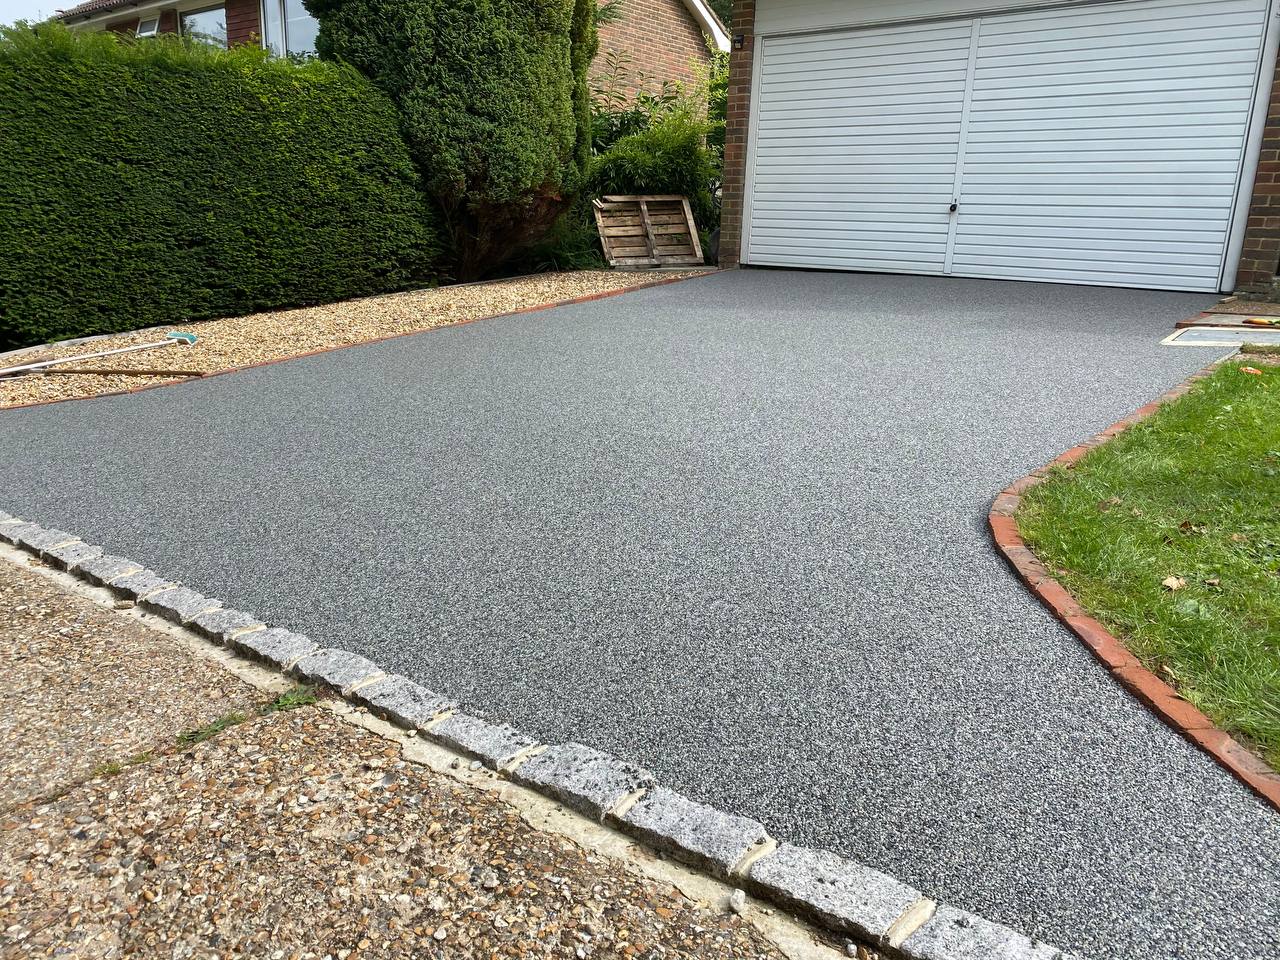 This is a photo of a new resin bound driveway carried out in Chester. All works done by Chester Resin Driveways